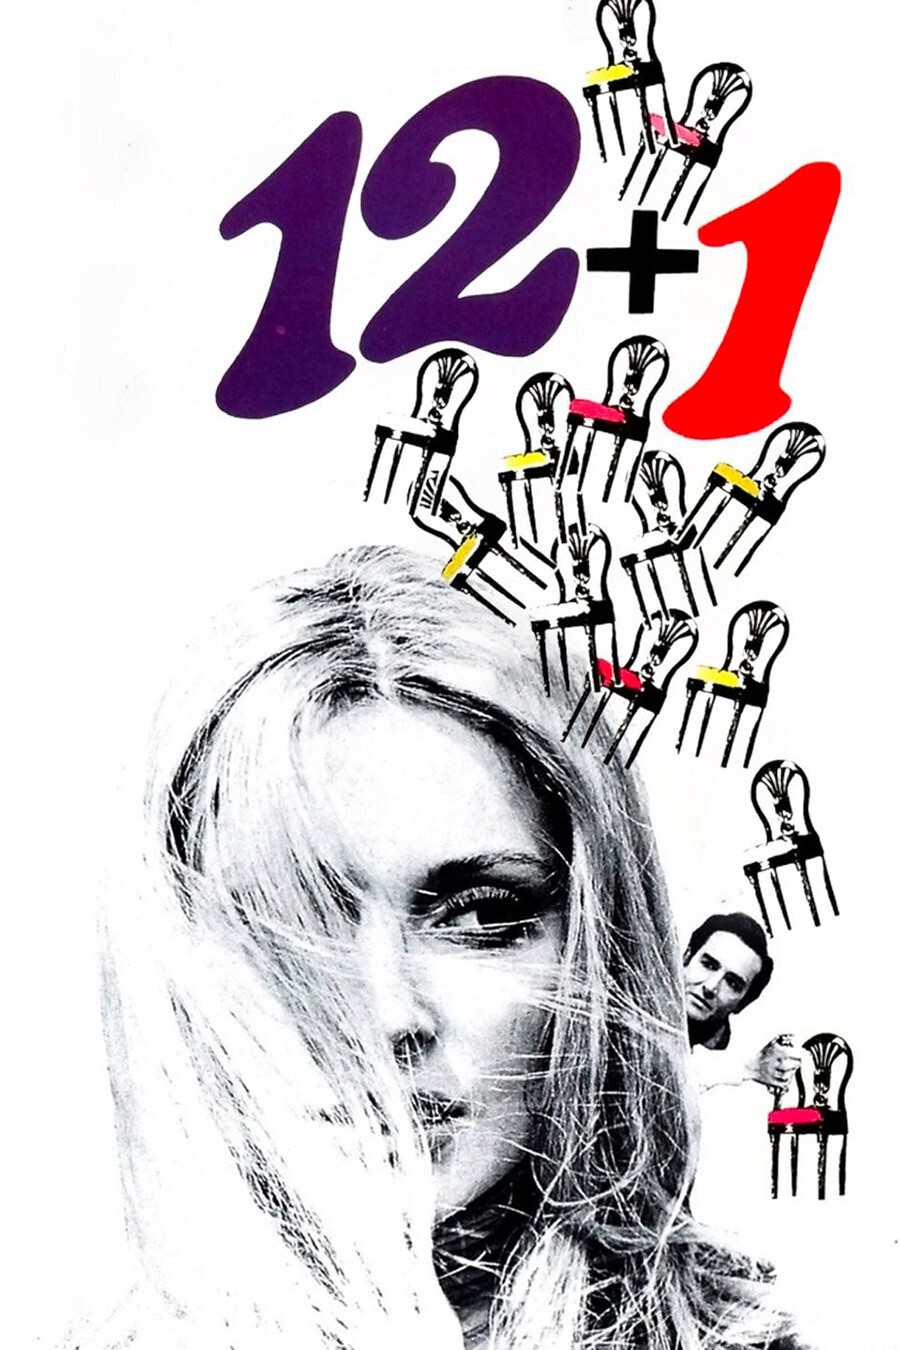 A poster for 'The Thirteen Chairs' starring Sharon Tate